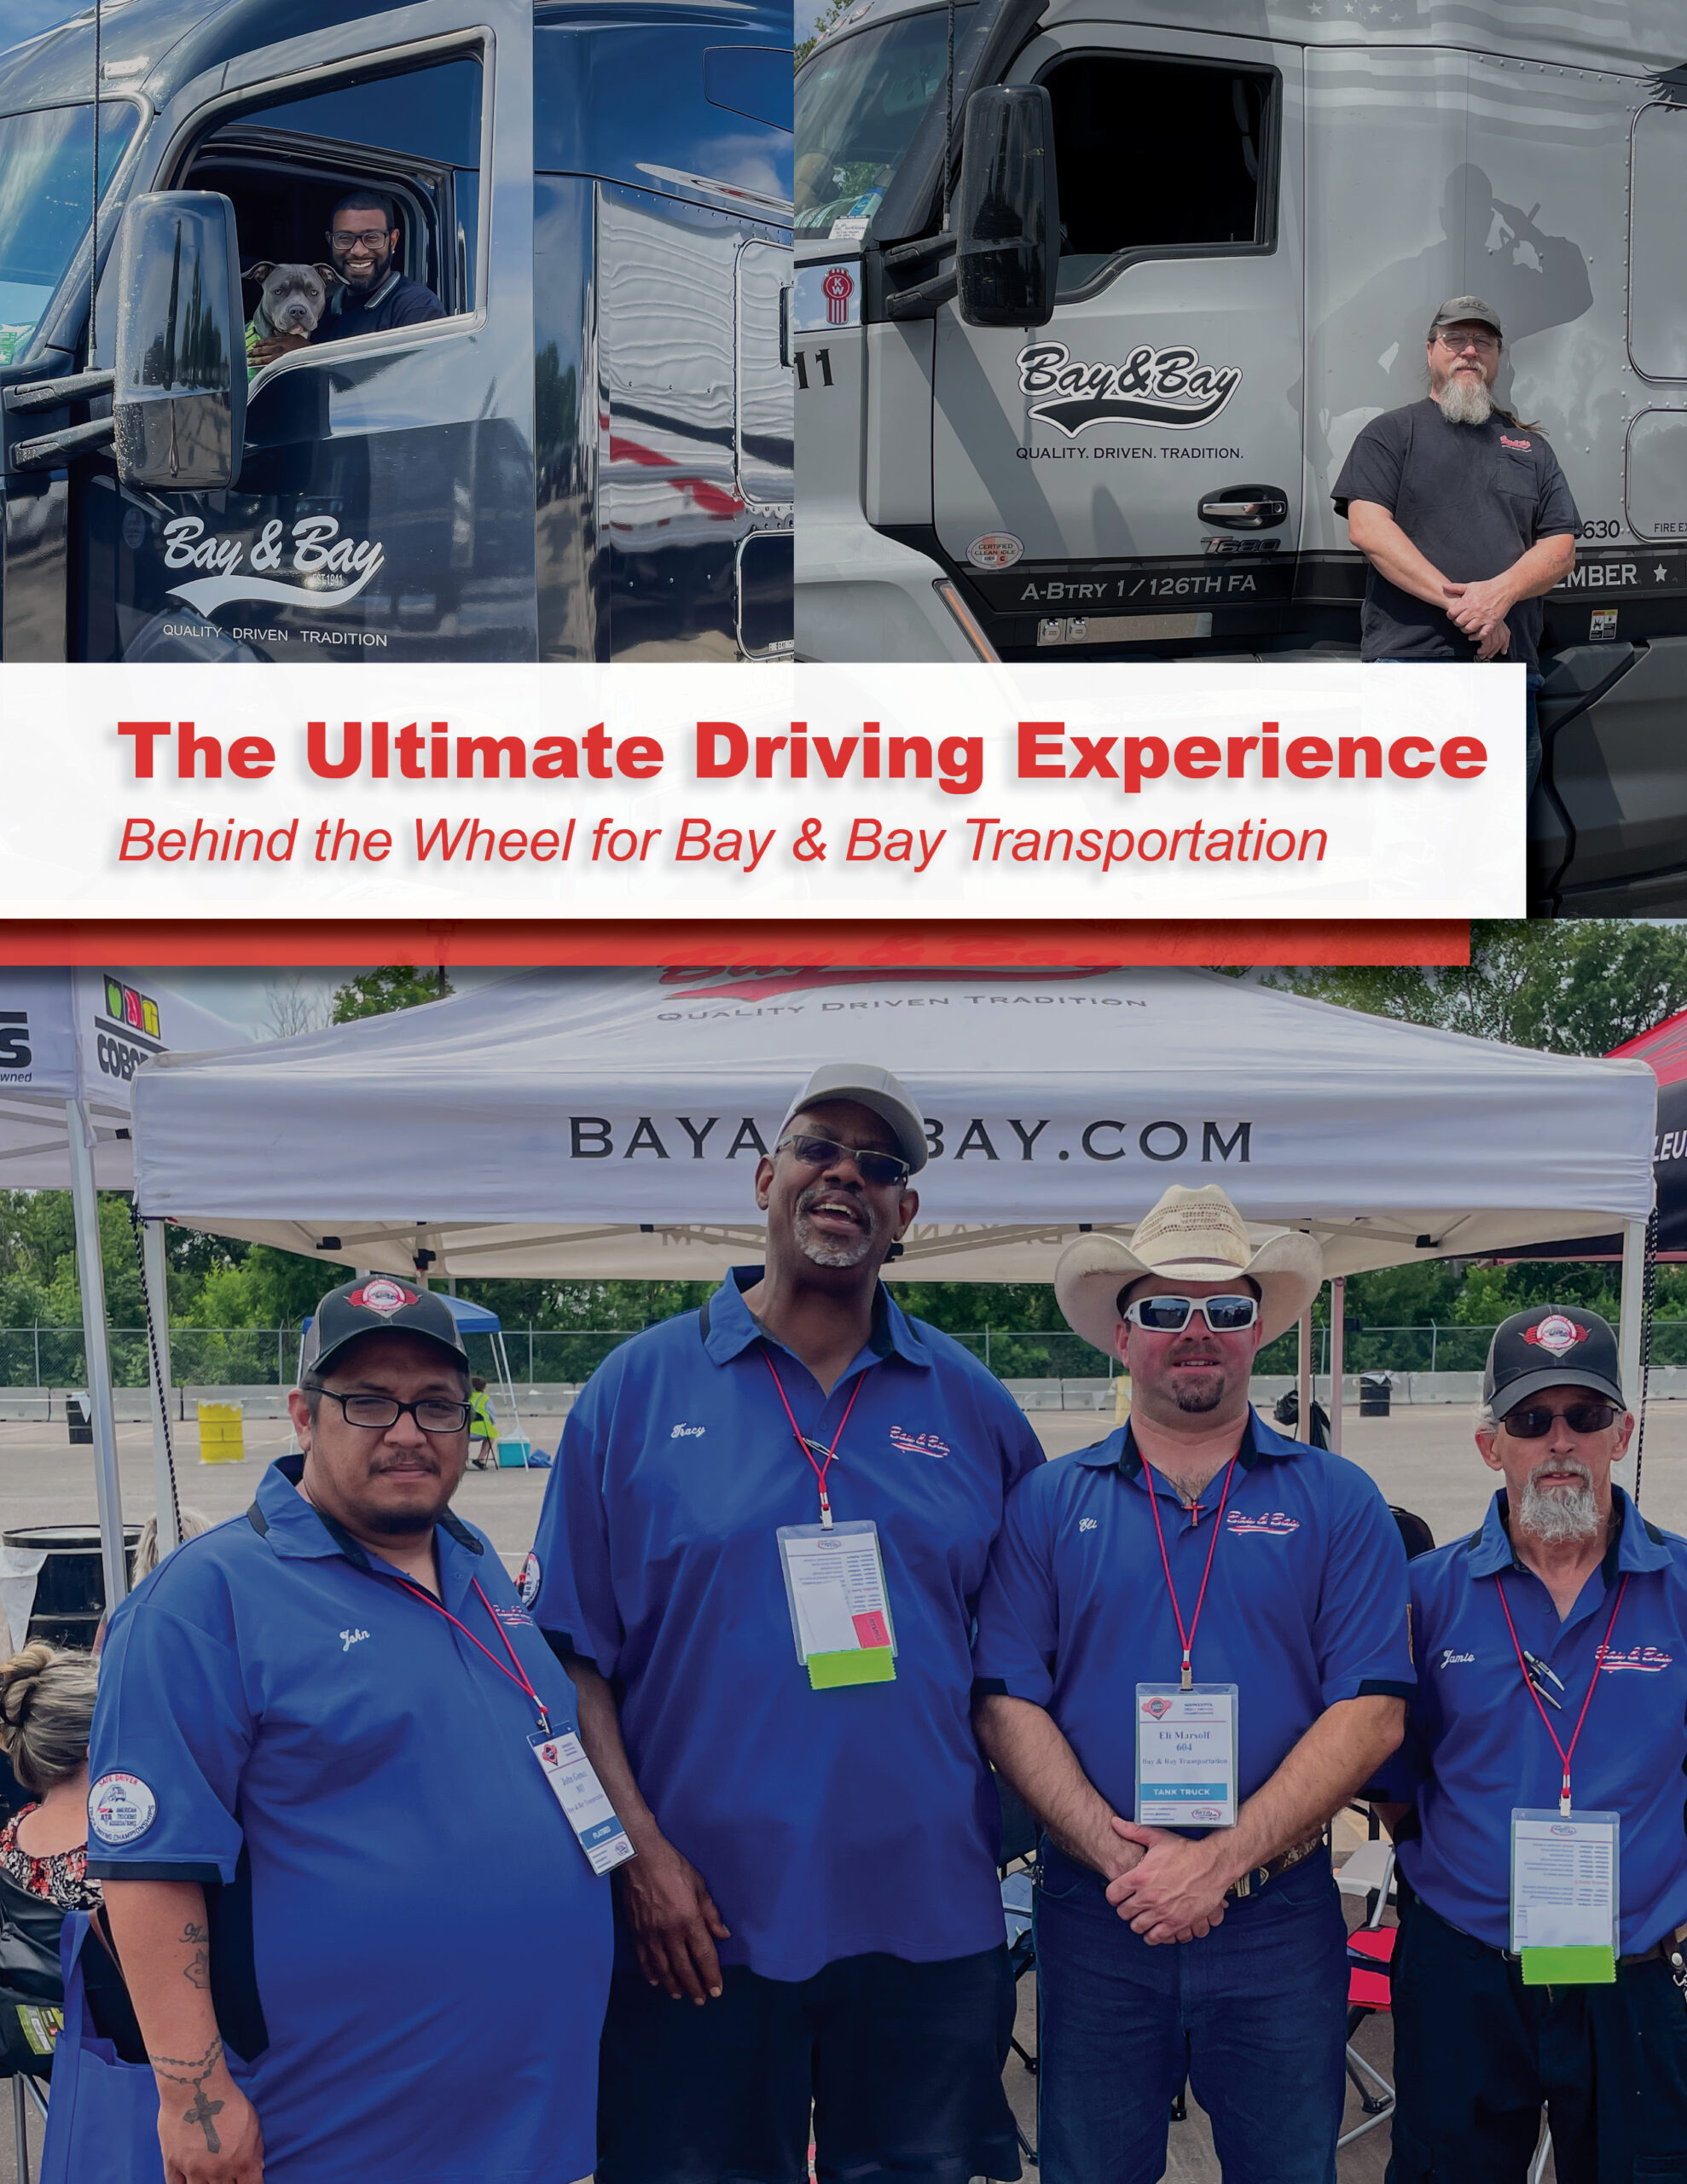 Truck Driving company focusing on positive workplace culture - Bay and Bay Transportation